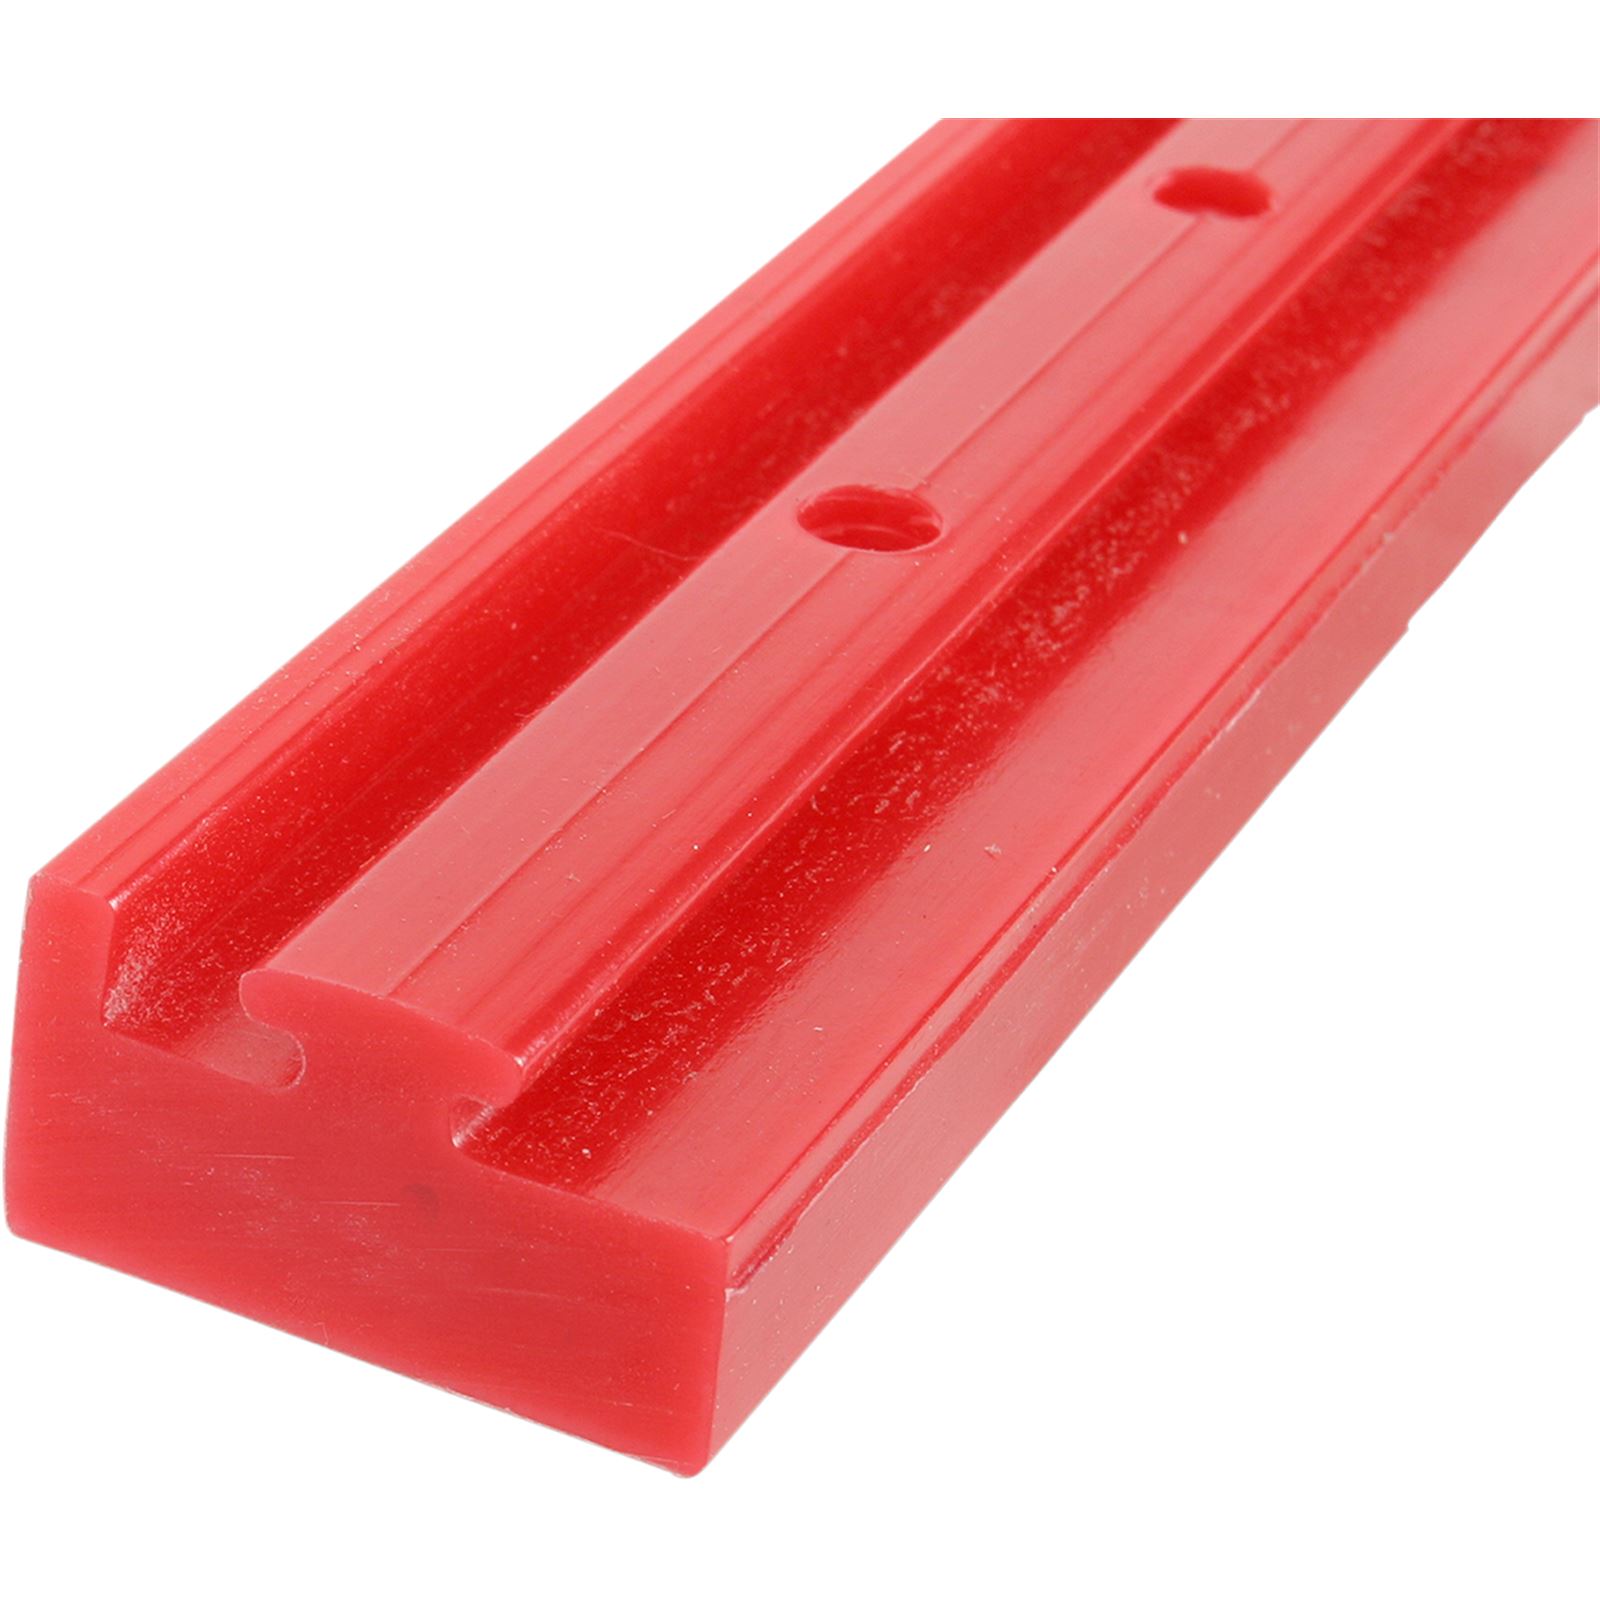 Garland Red Replacement Slide - UHMW - Profile 15 - Length 55.00" for Polaris